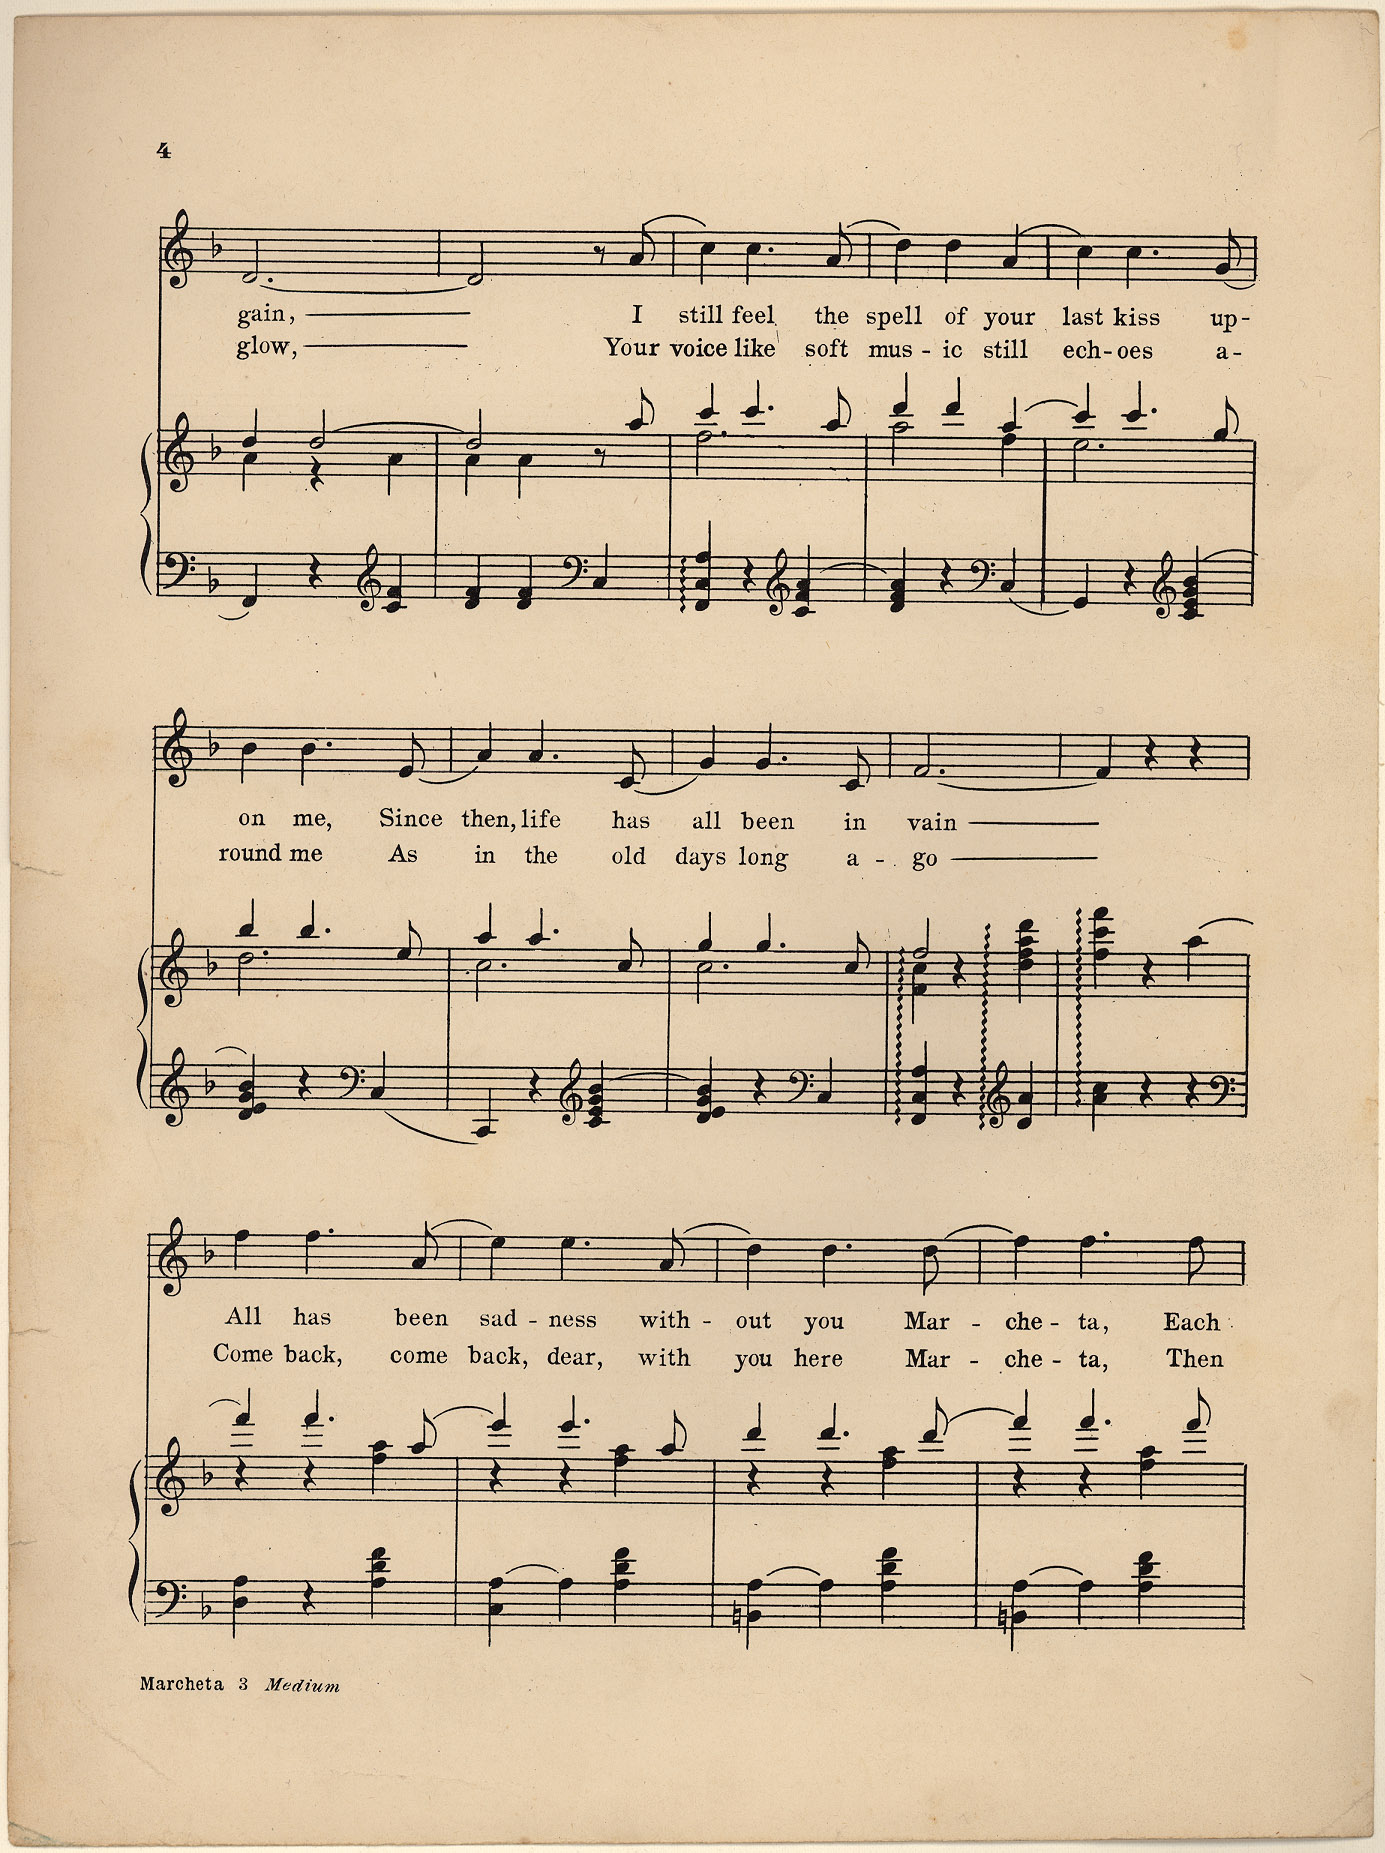 Marcheta; Love song of old Mexico [Historic American Sheet Music]